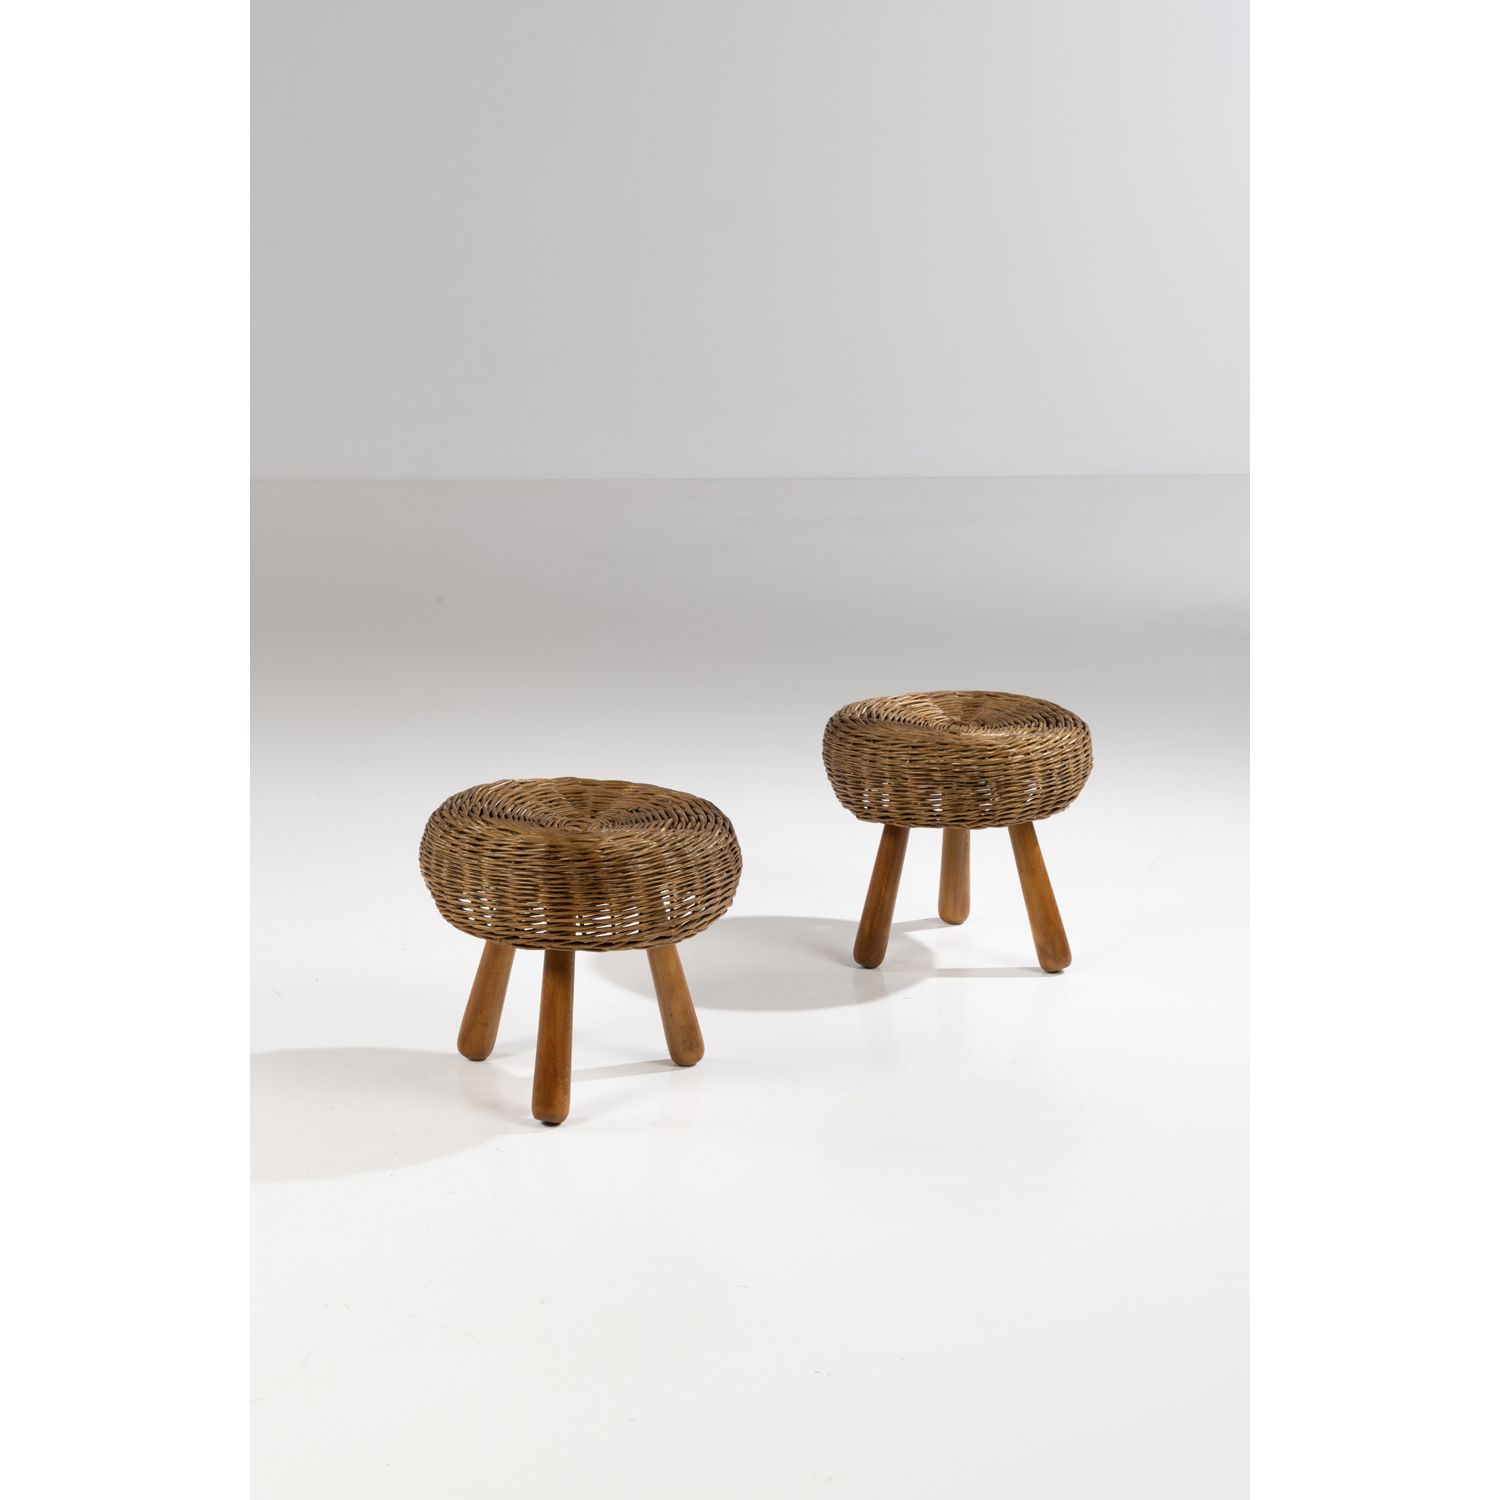 Null Tony Paul (1918-2010)

Pair of stools

Walnut and rattan

Model created in &hellip;